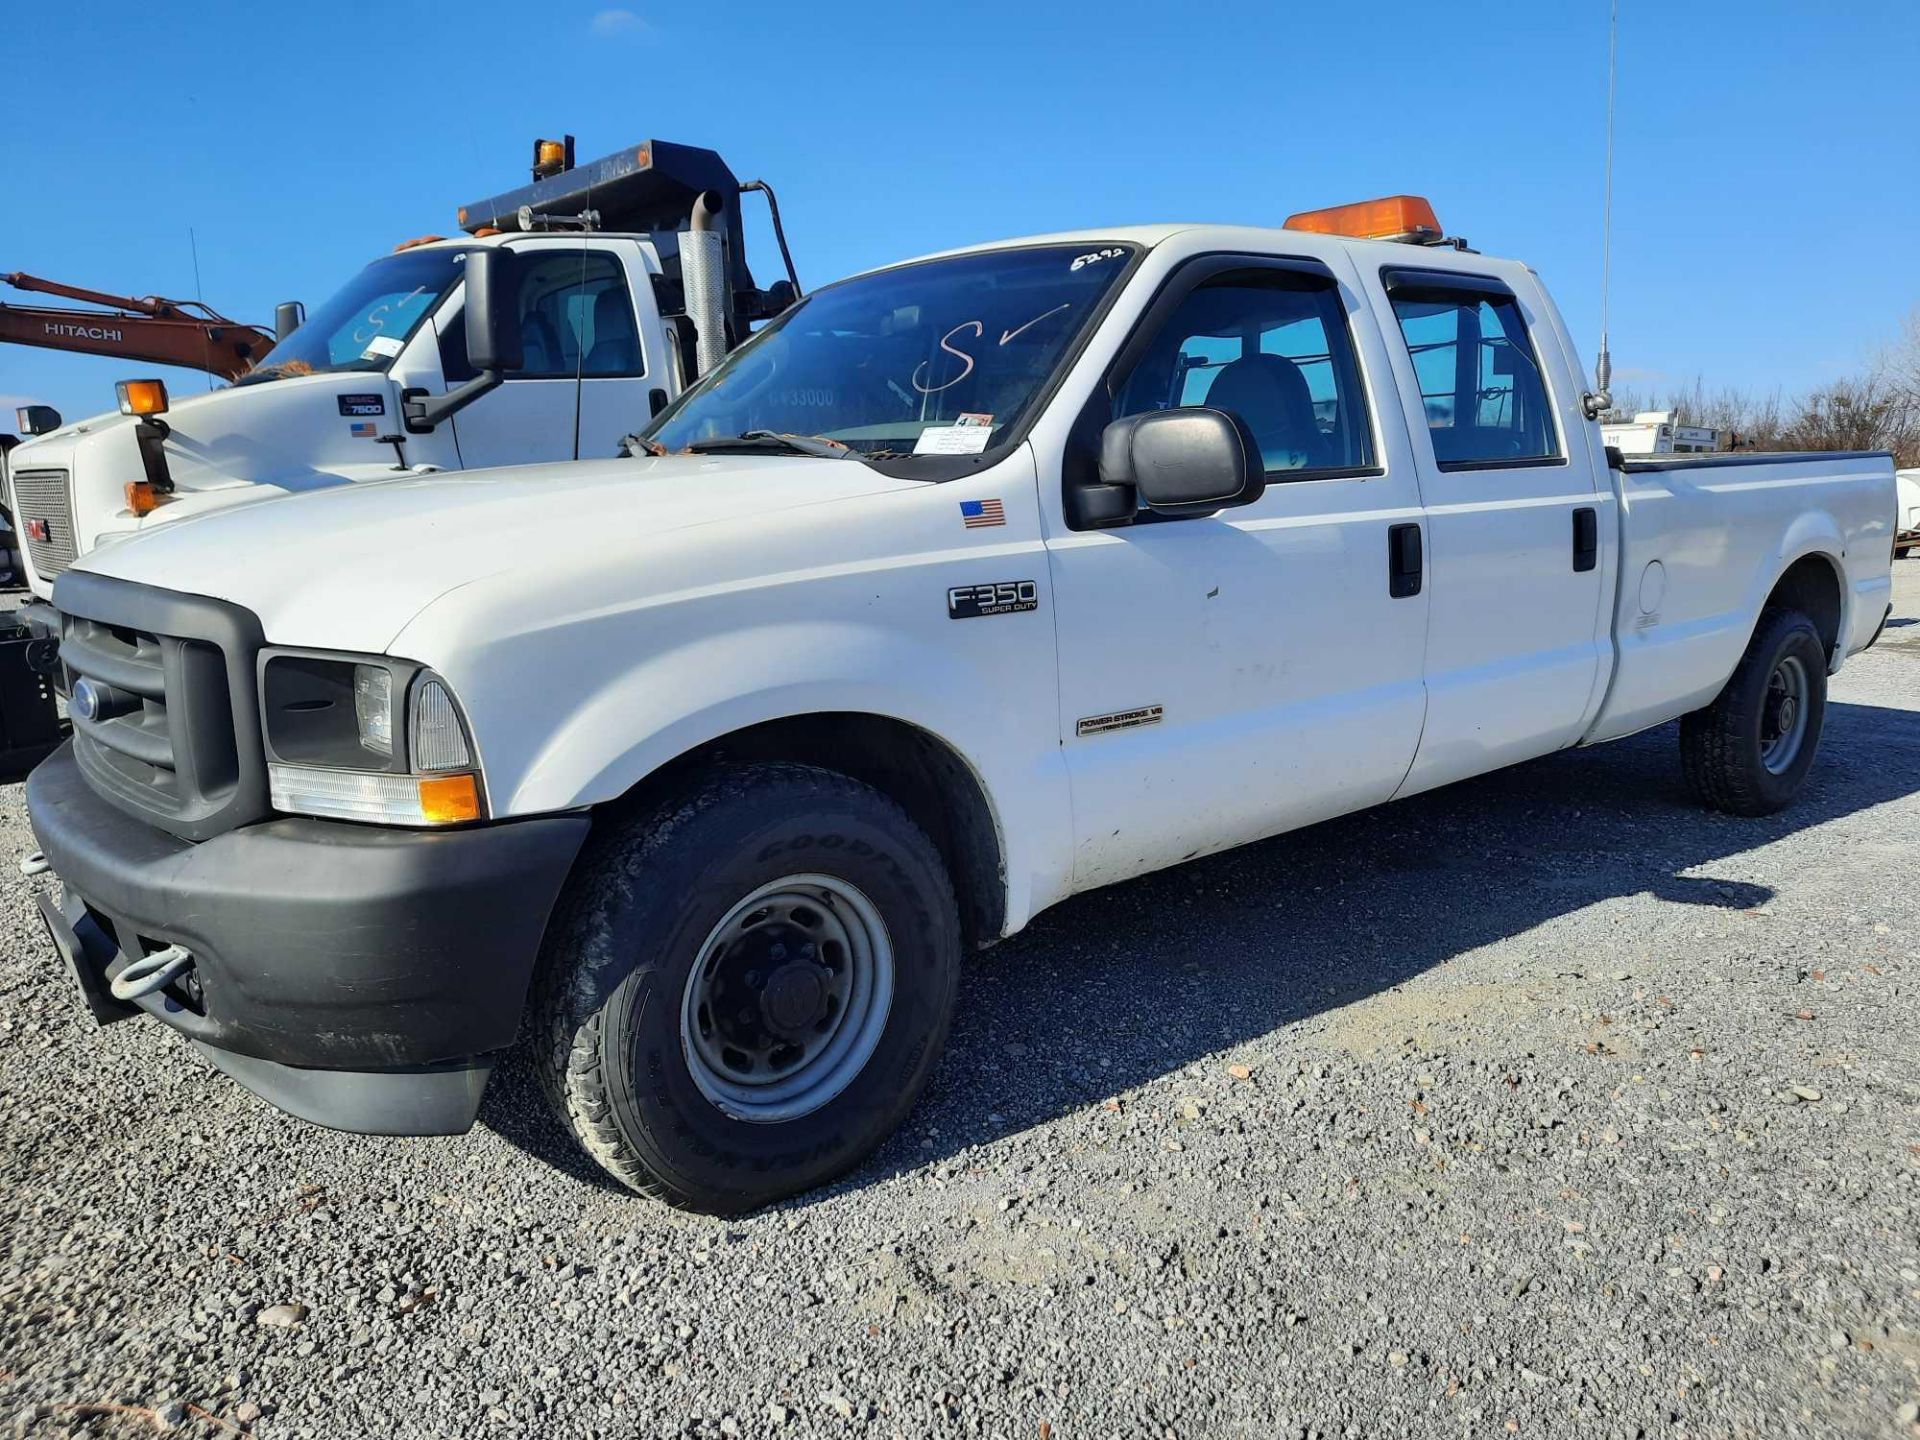 2003 FORD F350 PICK UP TRUCK (VDOT # R06582) - Image 4 of 15